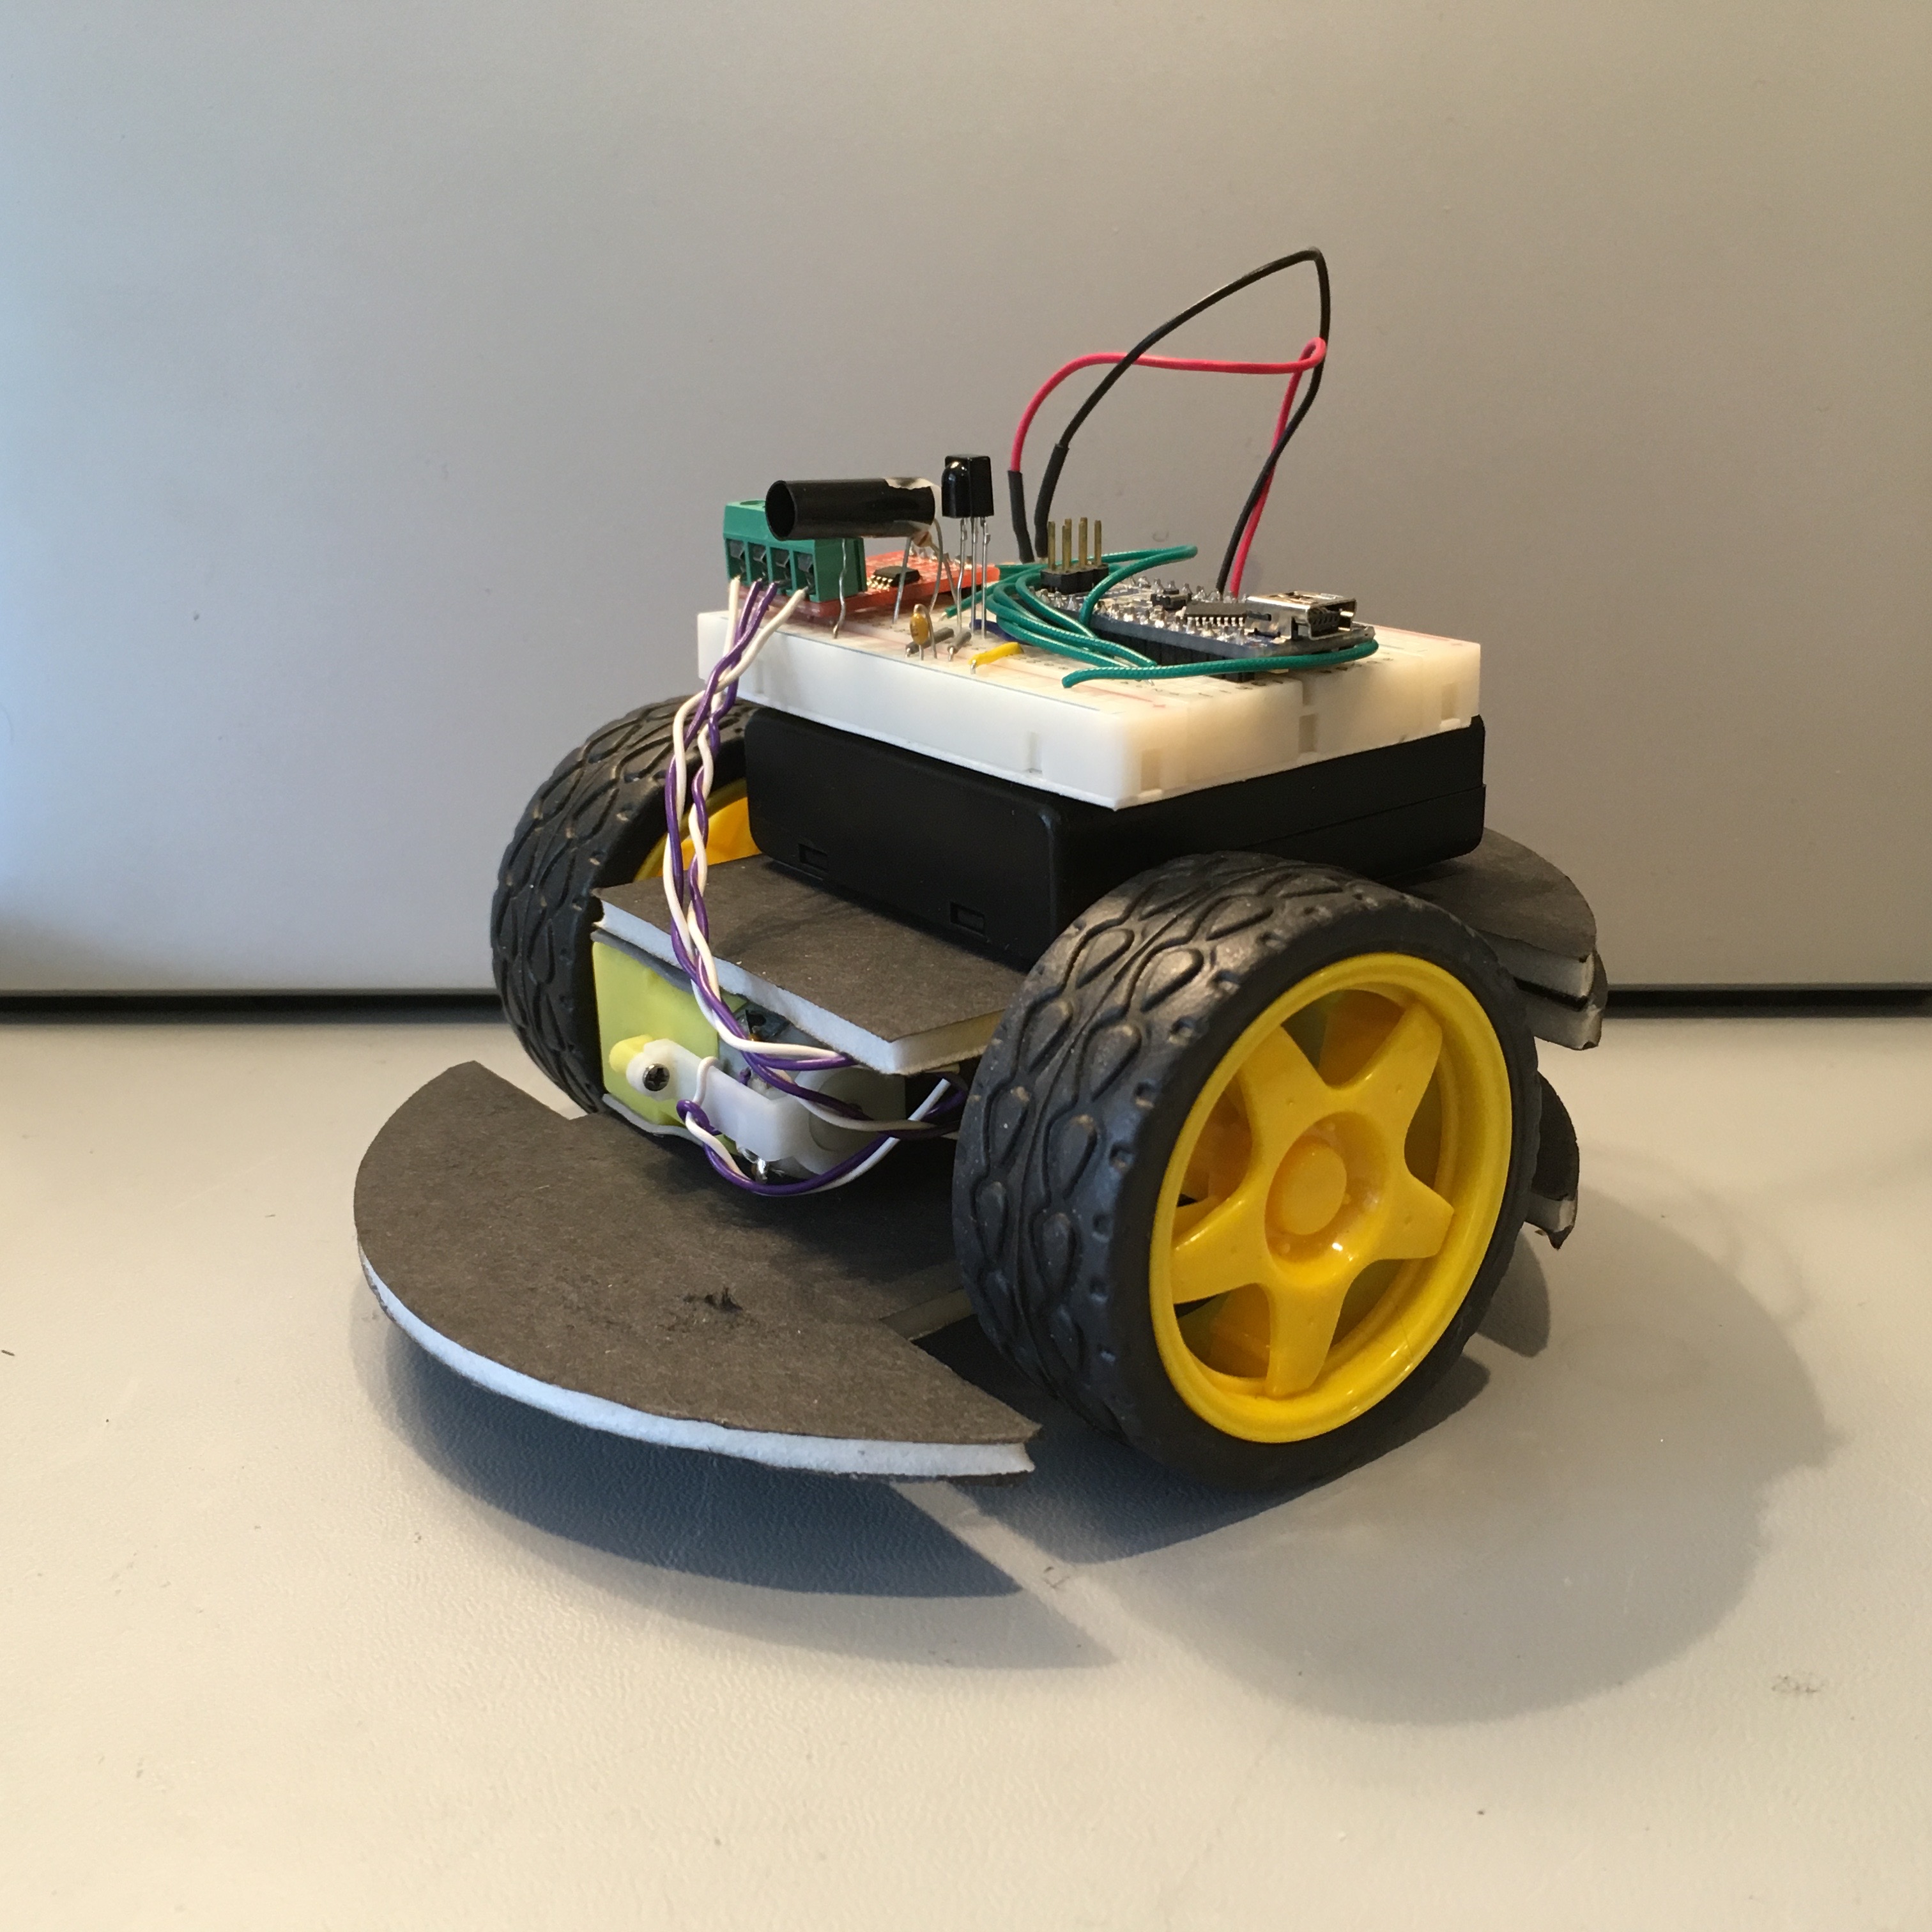 2020 Bot - Build a $20 robot in 20 minutes